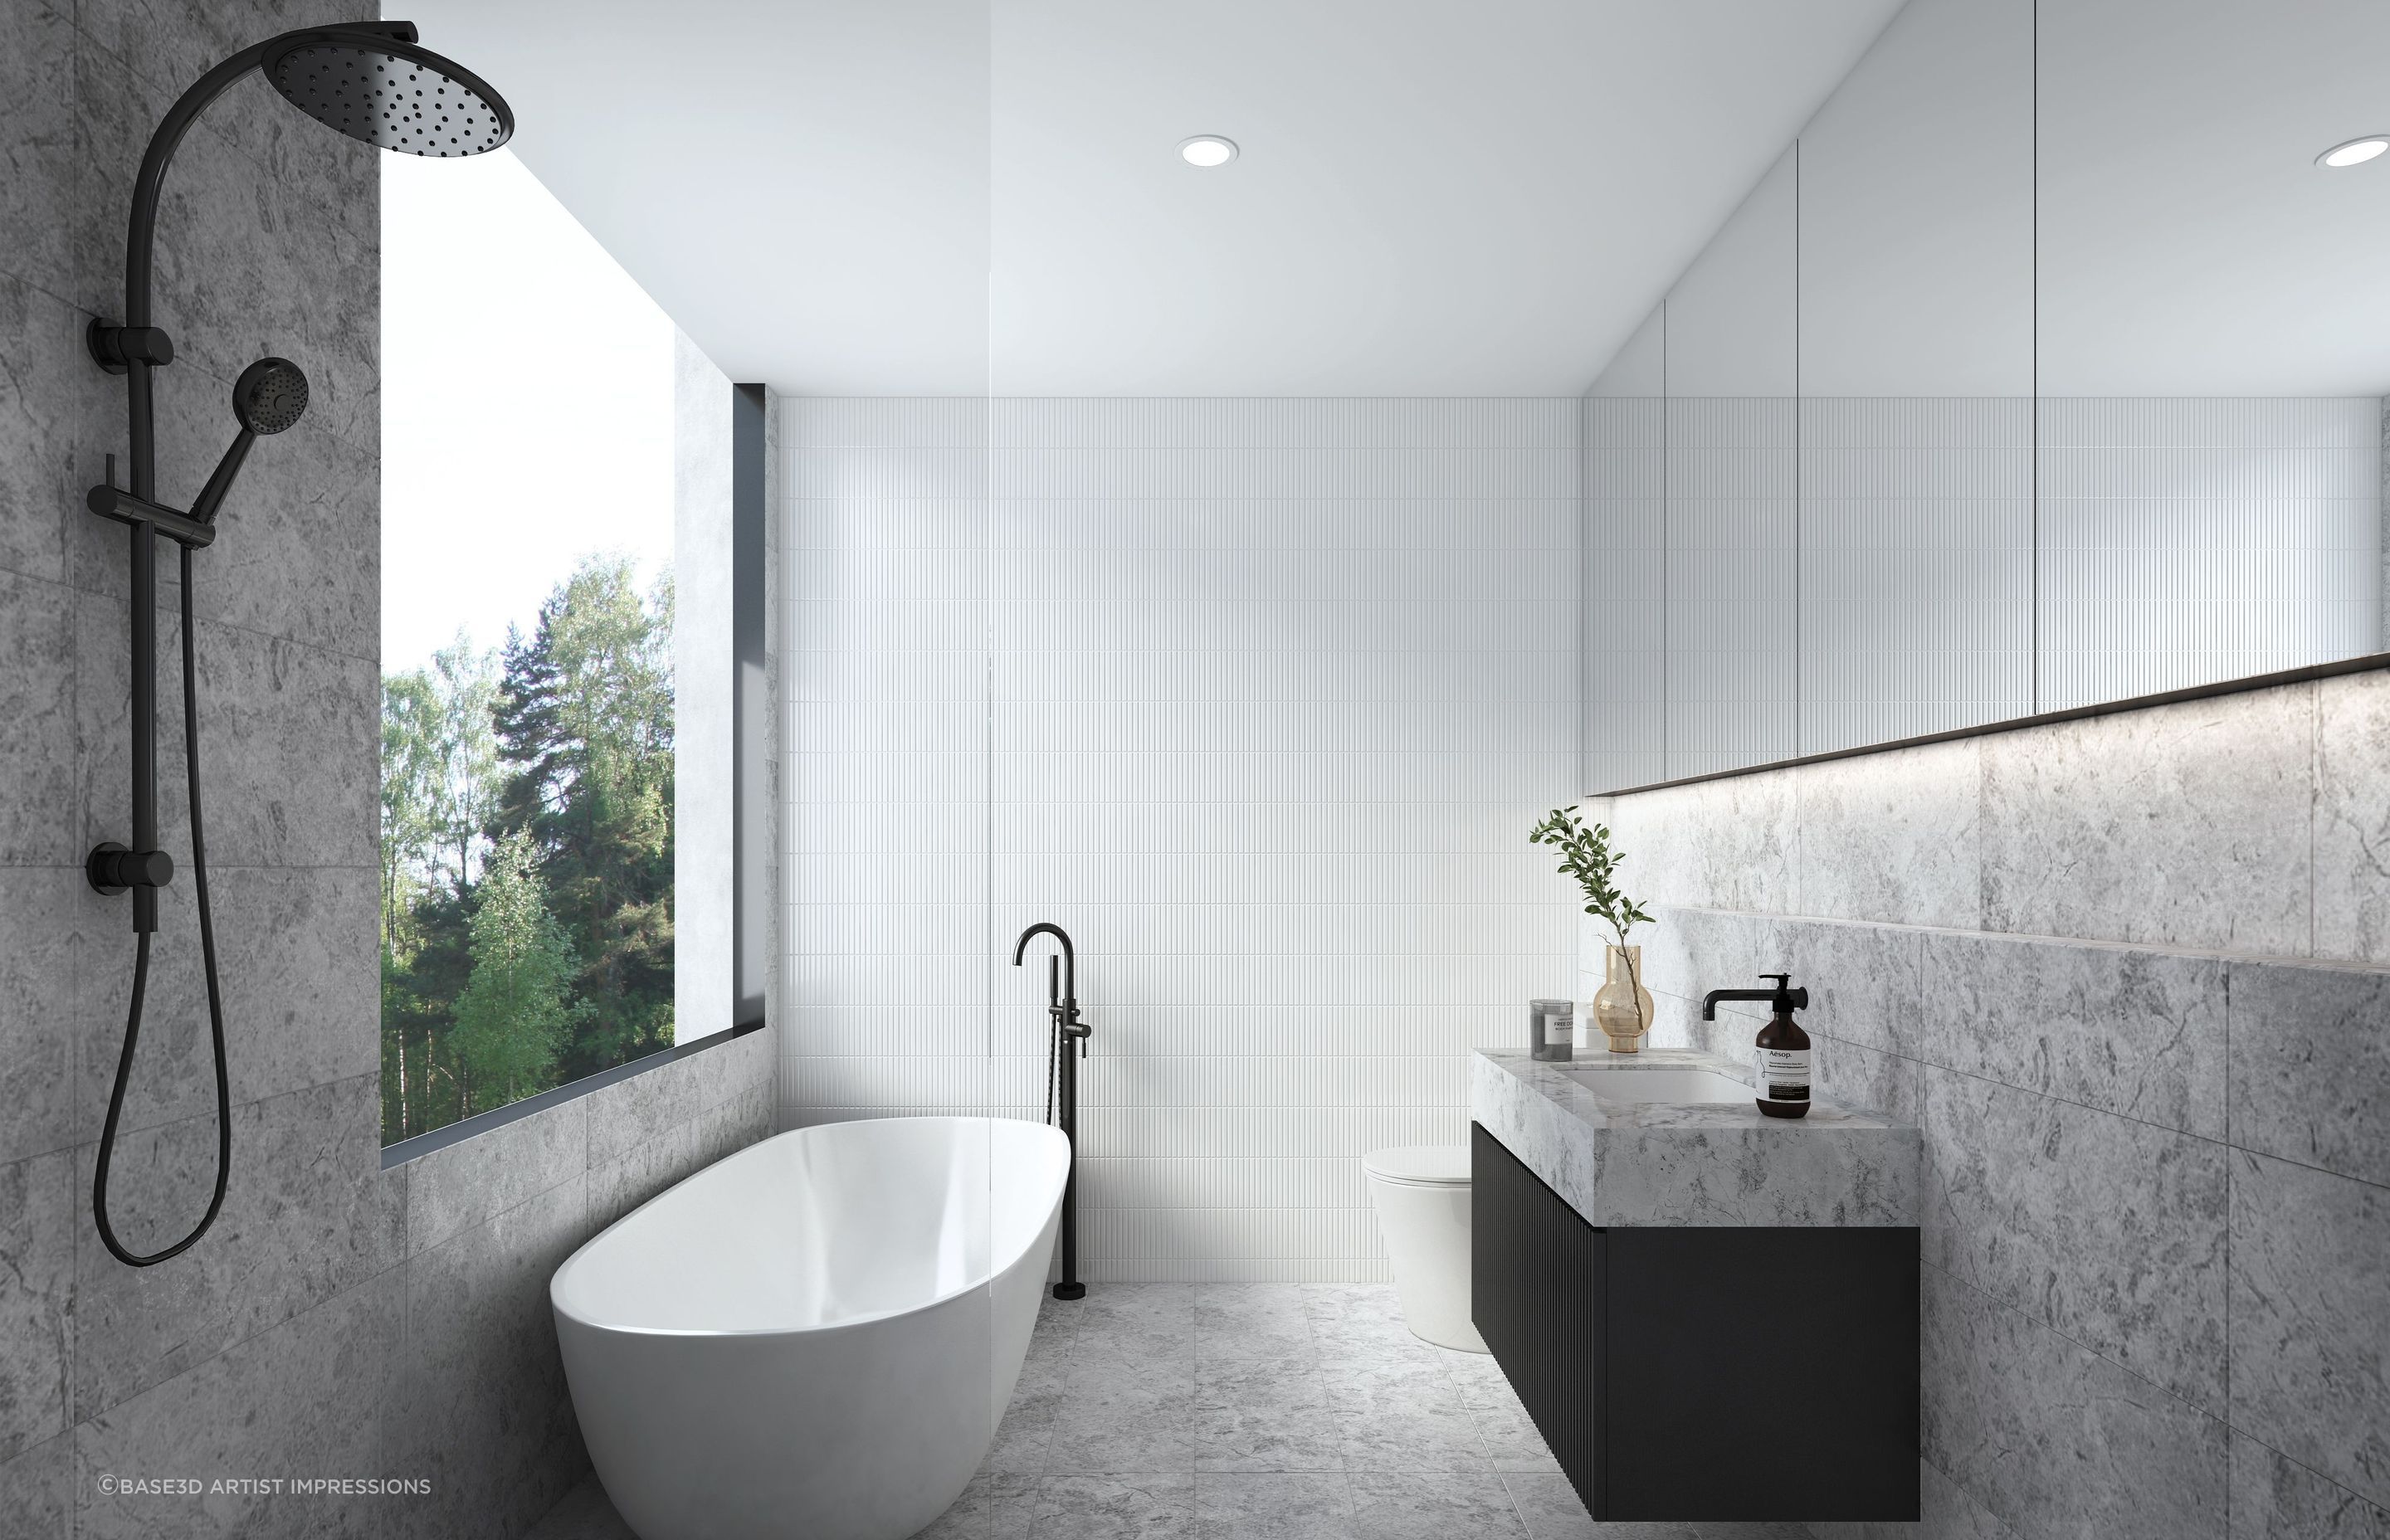 Most bathrooms will need to be at least 2.4m in width and 3.0m in length to comfortably fit standard bathroom fixtures.